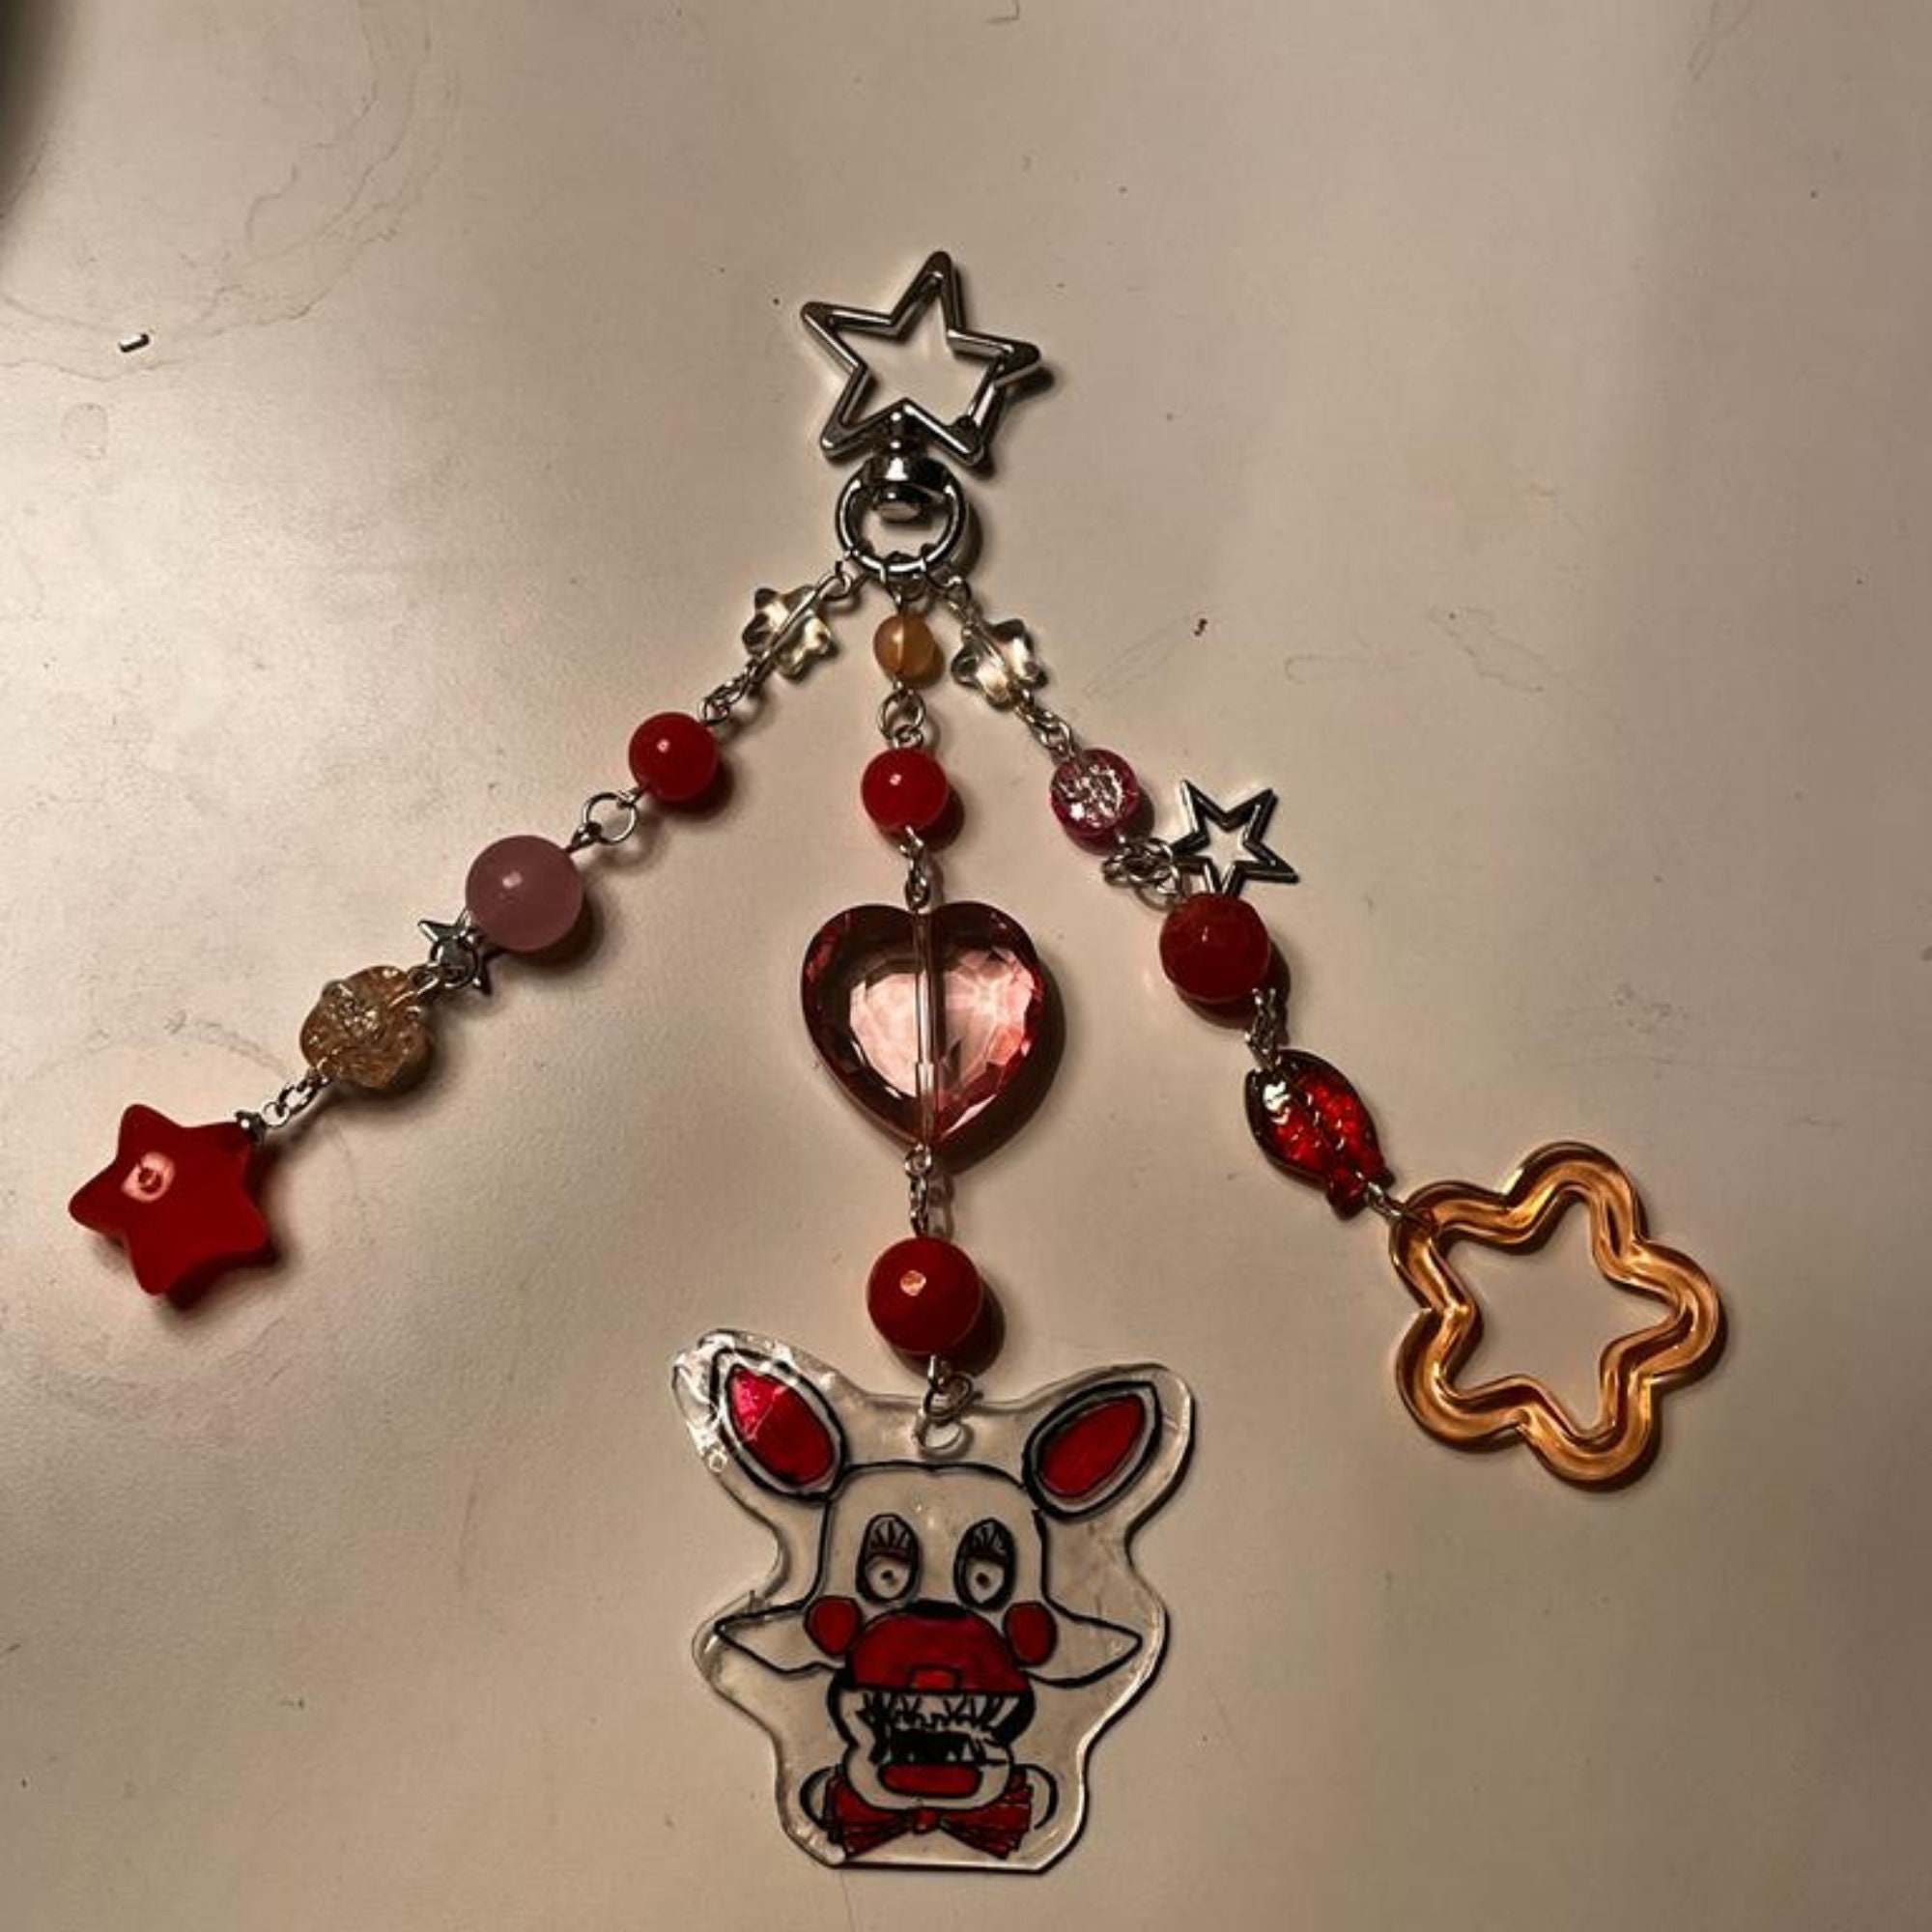 Five Nights at Freddy's Necklace Love Mangle Foxy Kissing Pendant Game FNAF